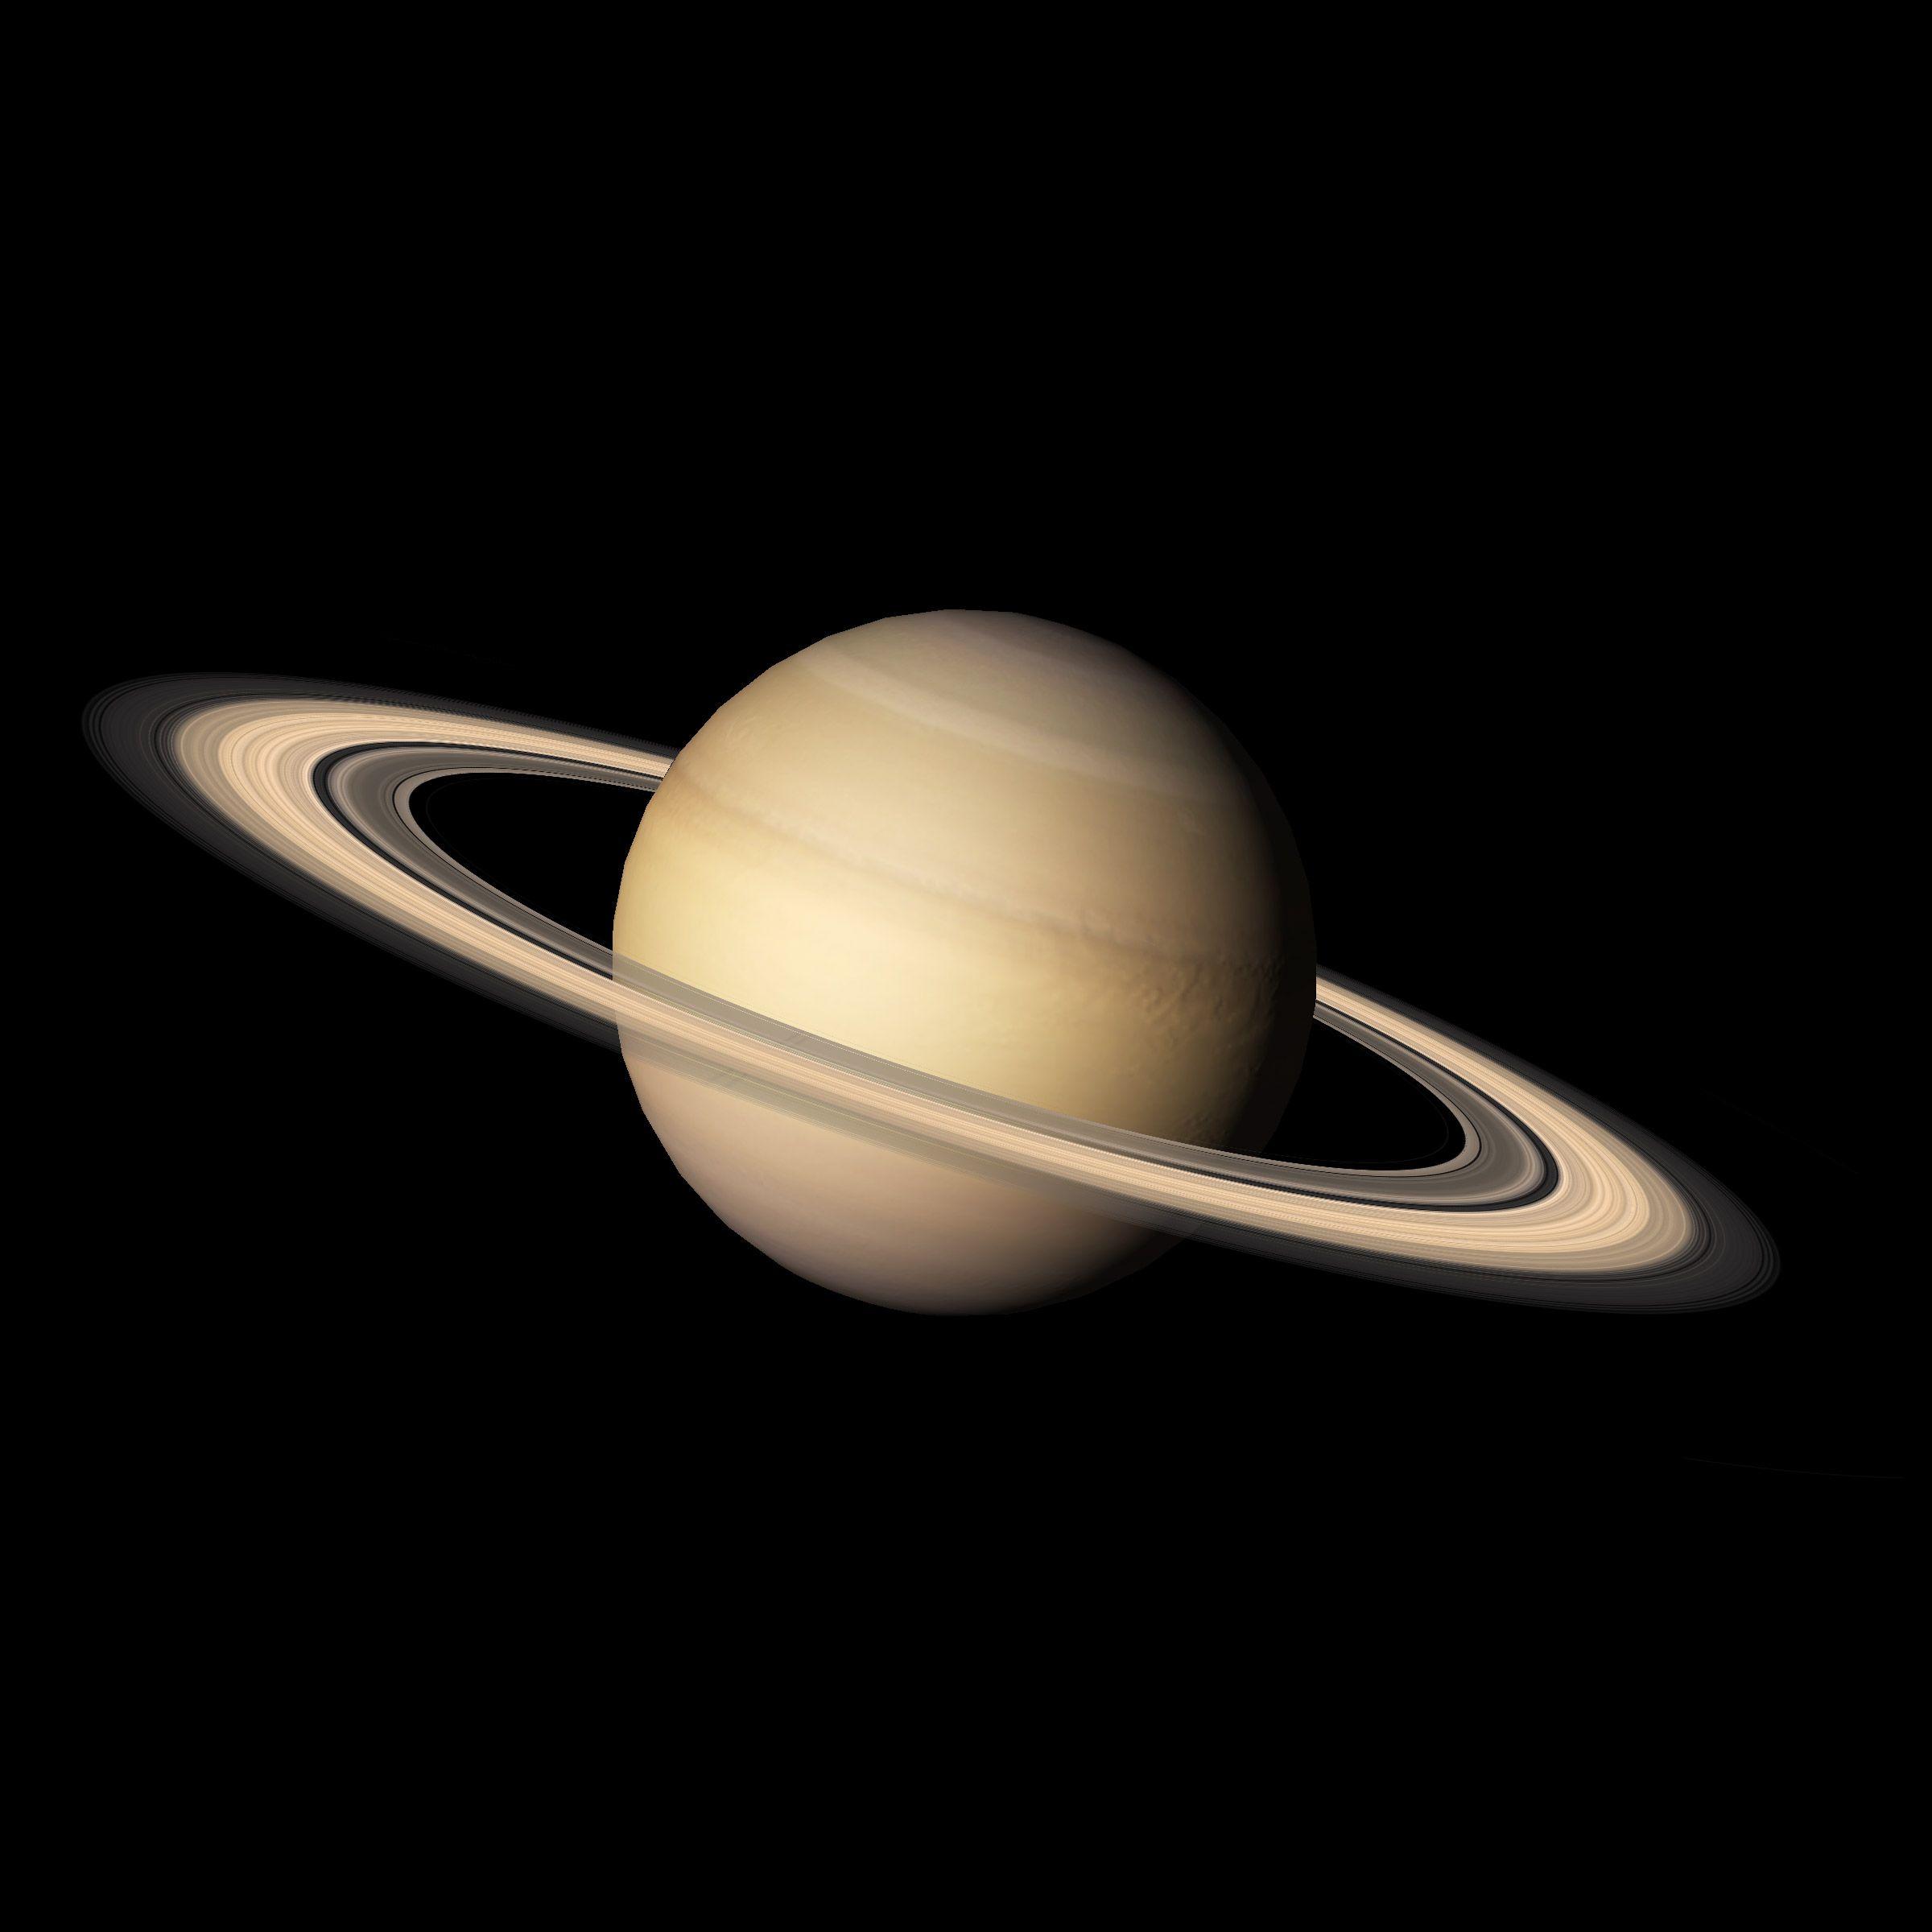 Saturn Wallpapers Top Free Saturn Backgrounds Wallpaperaccess 6422